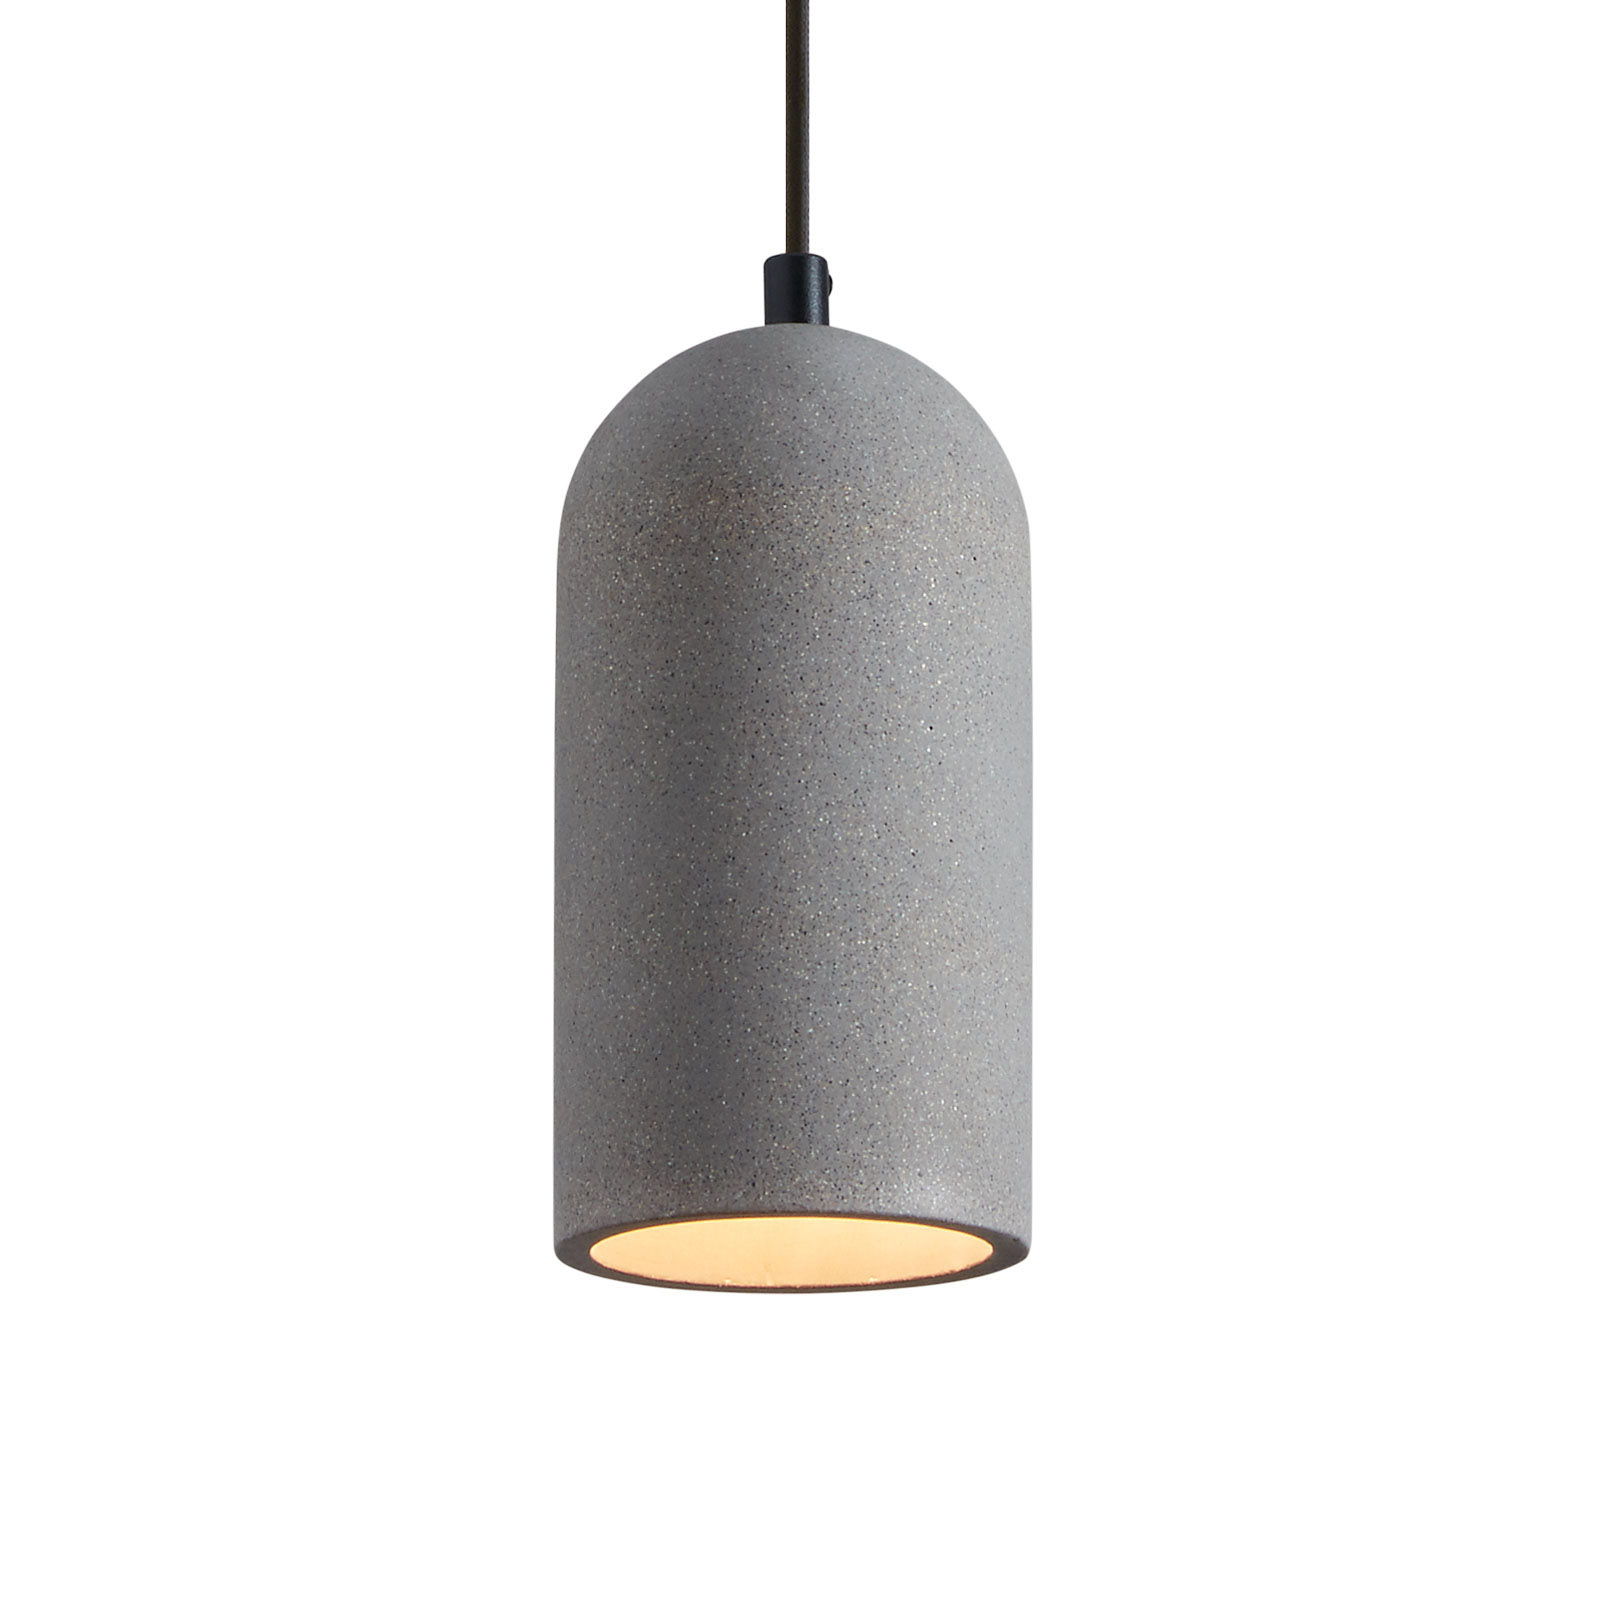 Eclipse hanging light made of cement, grey